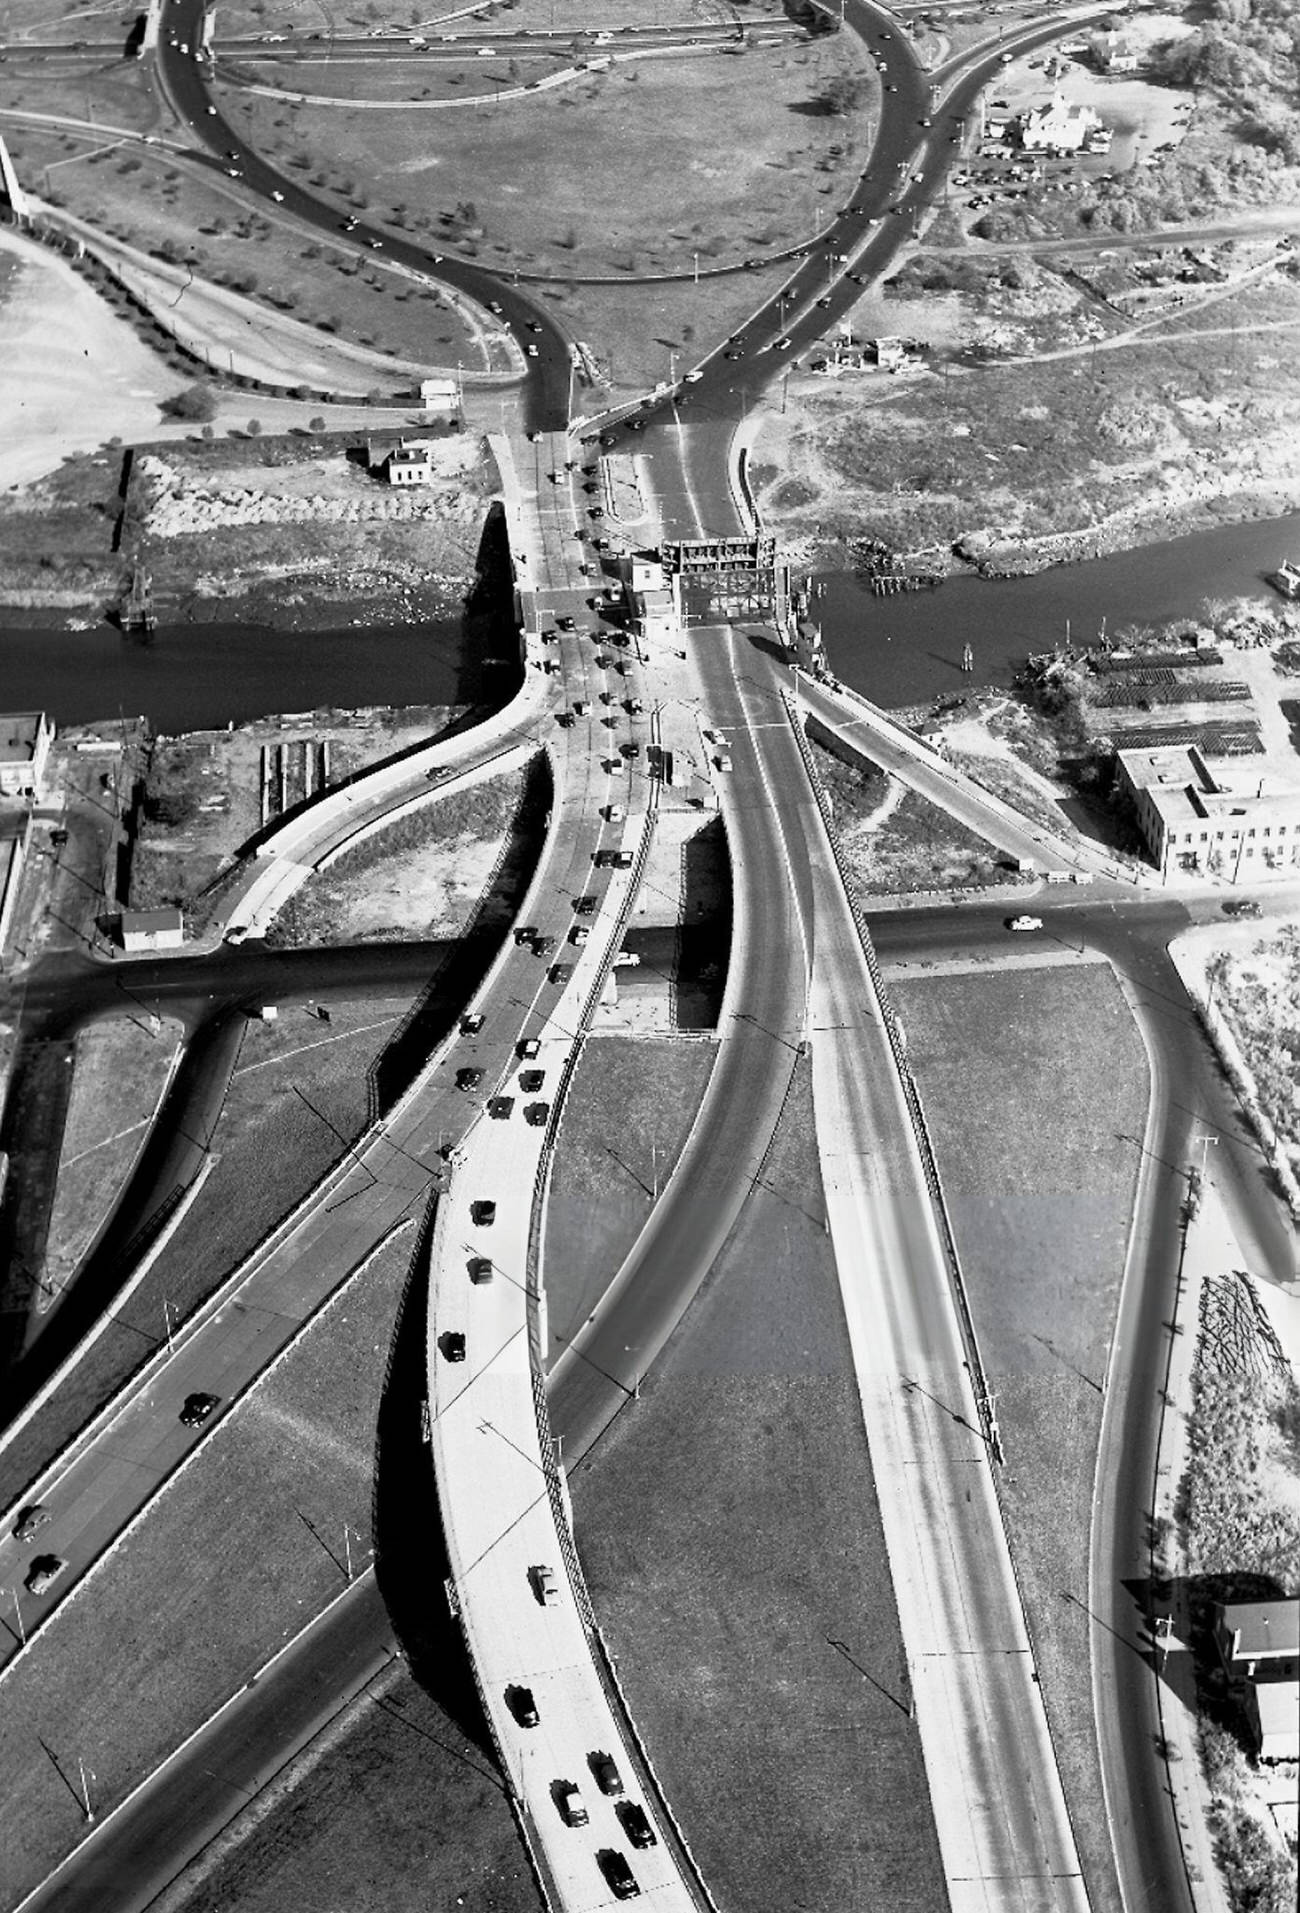 The Opening Of Two Reconstructed Bridges Improves Traffic Flow Along Bruckner Blvd. In The Bronx, 1952.